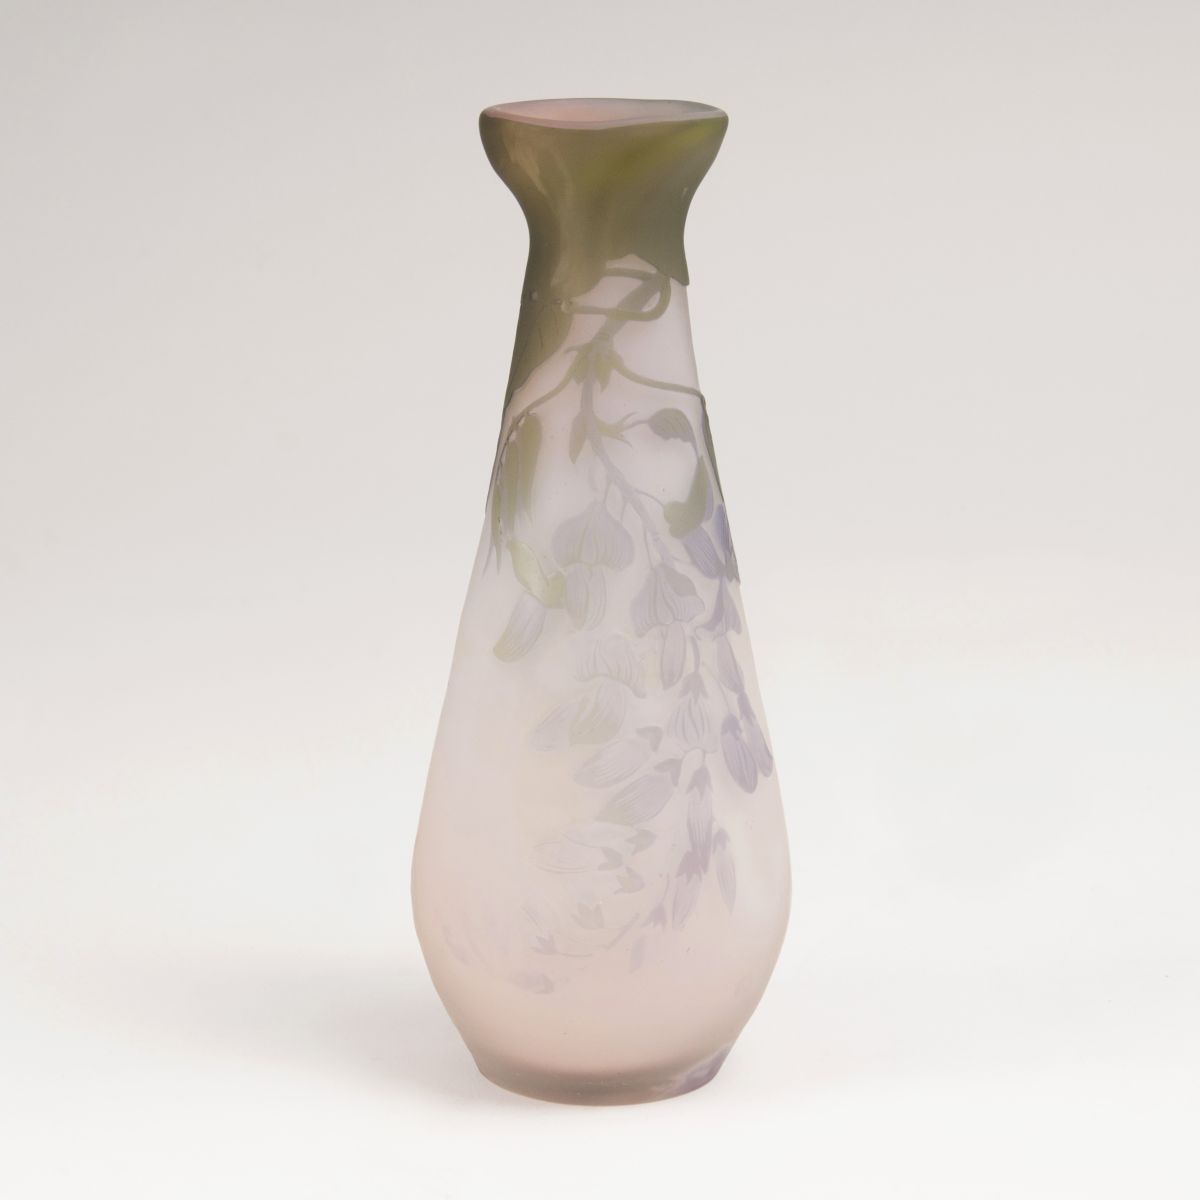 A Conical Gallé Vase with Wisteria